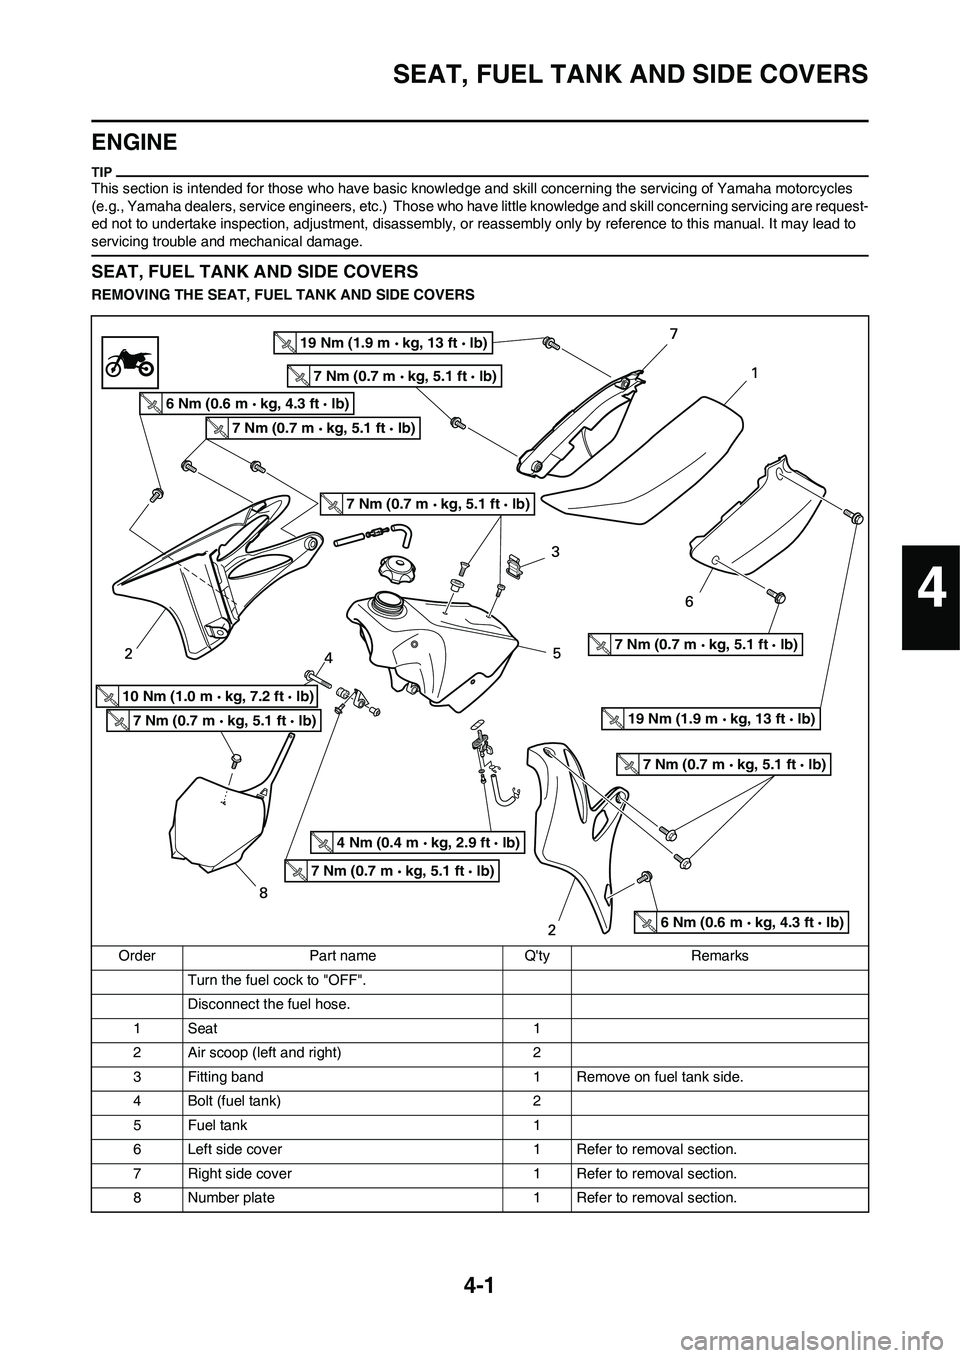 YAMAHA YZ125LC 2010 Owners Guide 4-1
SEAT, FUEL TANK AND SIDE COVERS
ENGINE
This section is intended for those who have basic knowledge and skill concerning the servicing of Yamaha motorcycles 
(e.g., Yamaha dealers, service engineer